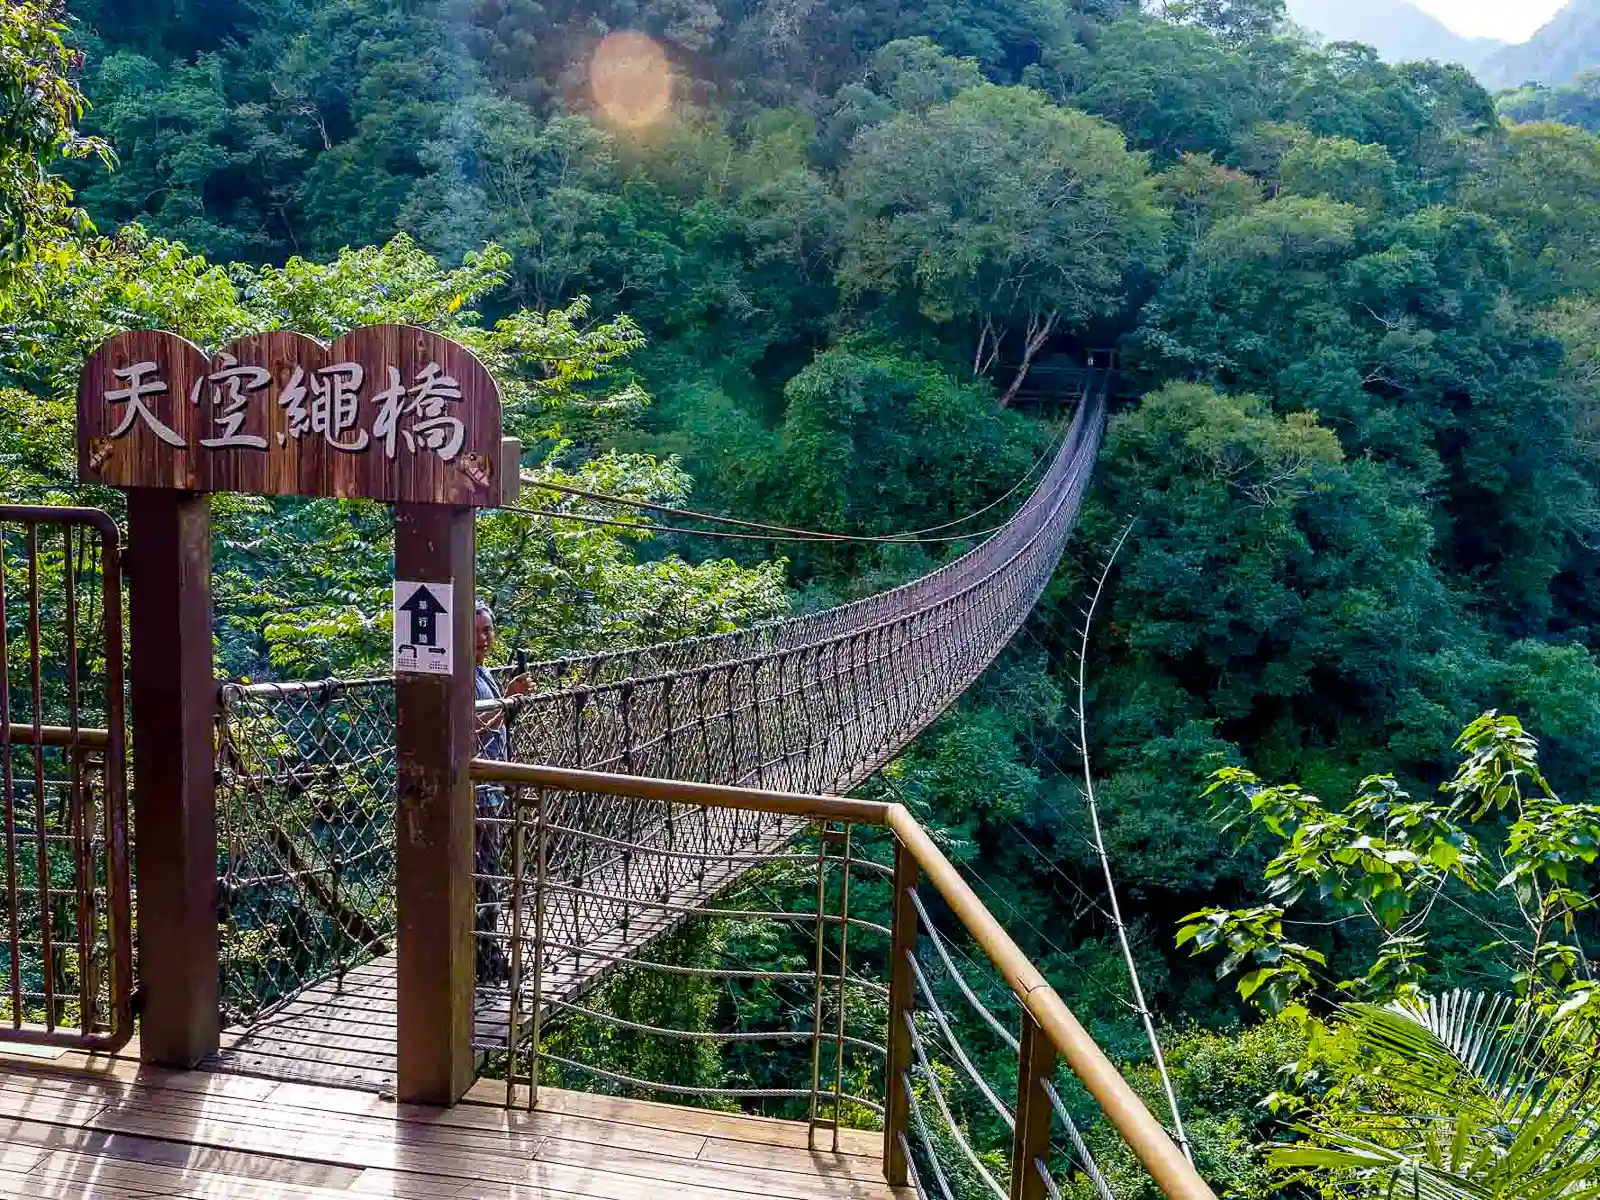 A rope bridge made of rope and wooden plants leads across a long valley.